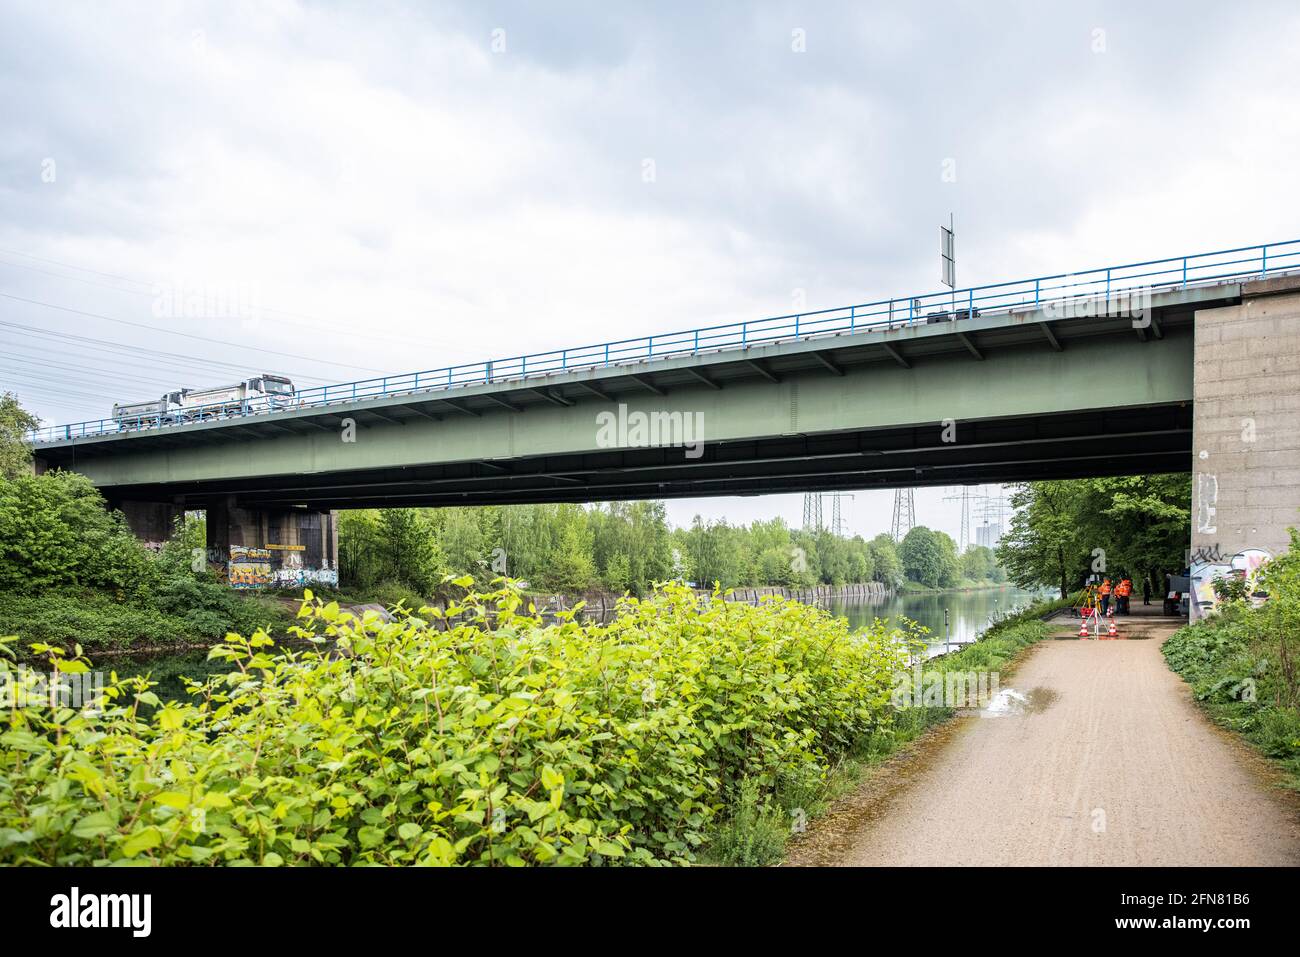 Herne, Germany. 15th May, 2021. Surveys take place during a load test under the damaged A43 Emschertal Bridge. Because the steel girders of the bridge over the Rhine-Herne Canal have buckled due to excessive loads in recent years, the bridge is already closed to trucks weighing more than 3.5 tonnes. In the period from Friday (14.5.) 10 p.m. to Monday (17.5.) 5 a.m. as well as from Friday (21.5.) 8 p.m. to Tuesday (25.5.) 5 a.m. the stretch between the motorway junctions Herne and Recklinghausen will be completely closed. Credit: Marcel Kusch/dpa/Alamy Live News Stock Photo